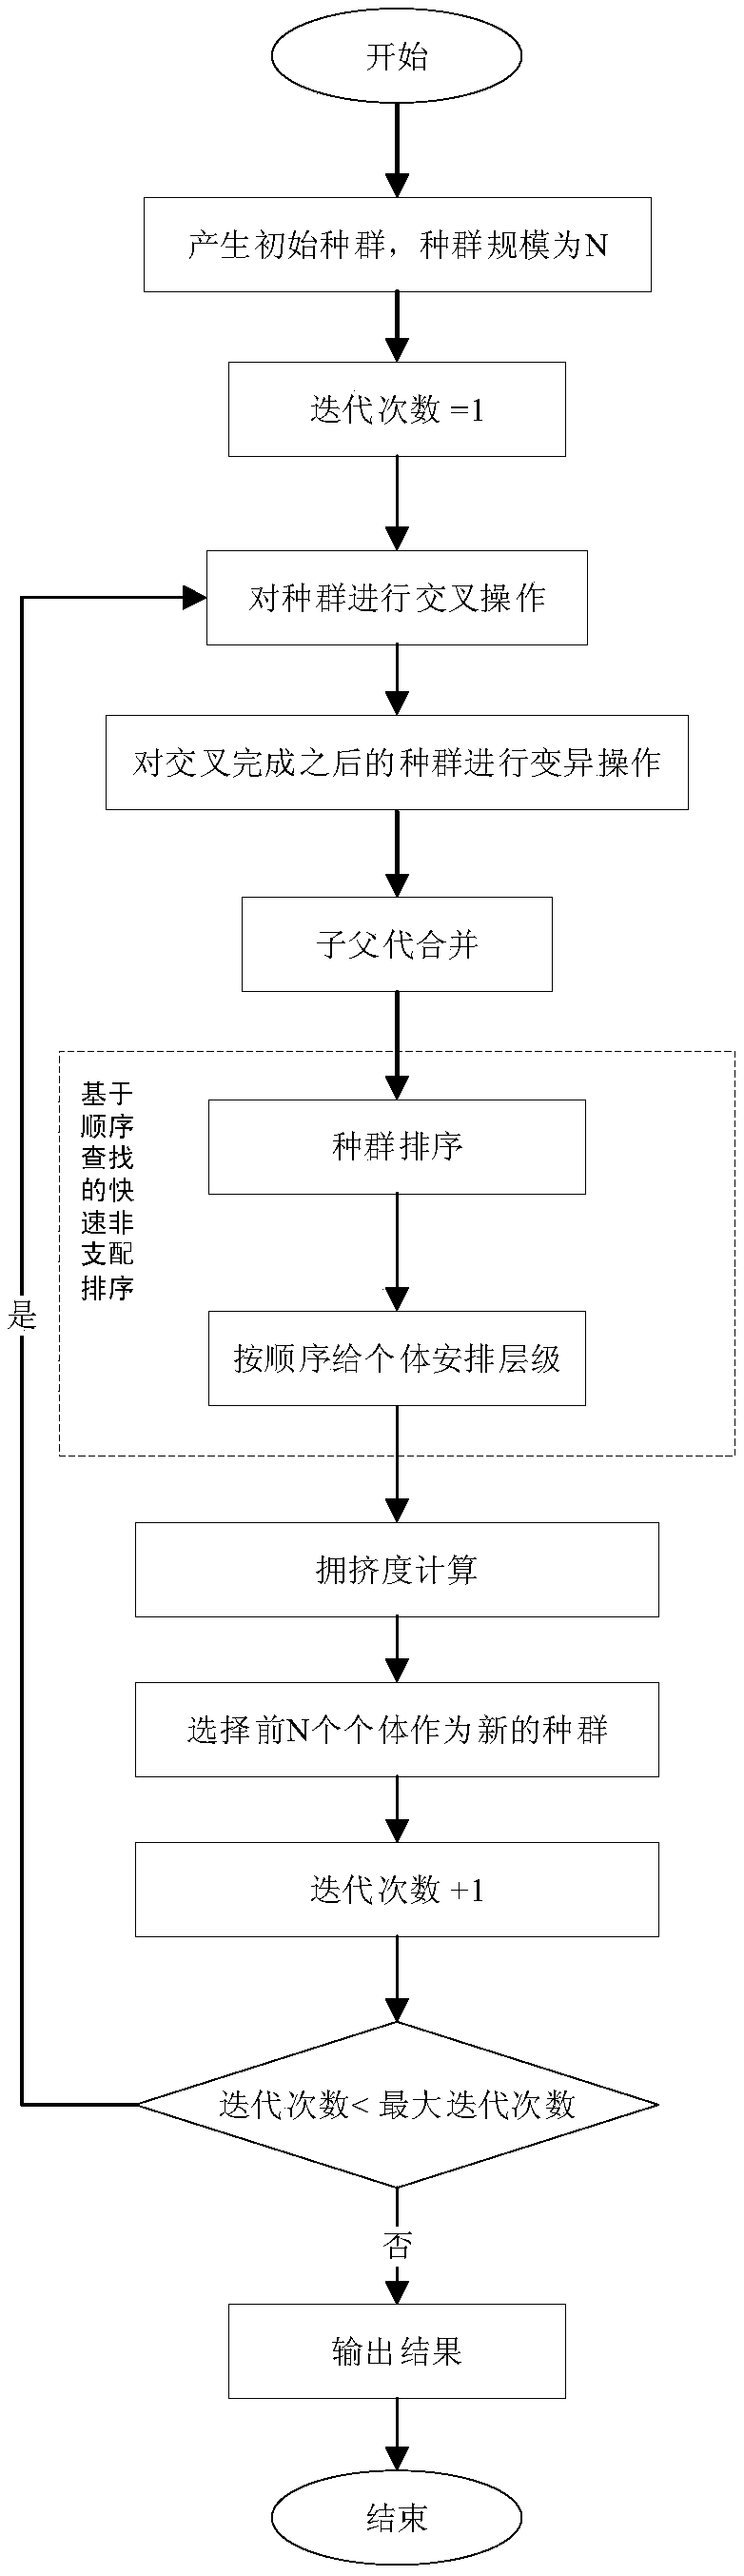 Cloud resource allocation method and system based on multi-objective optimization